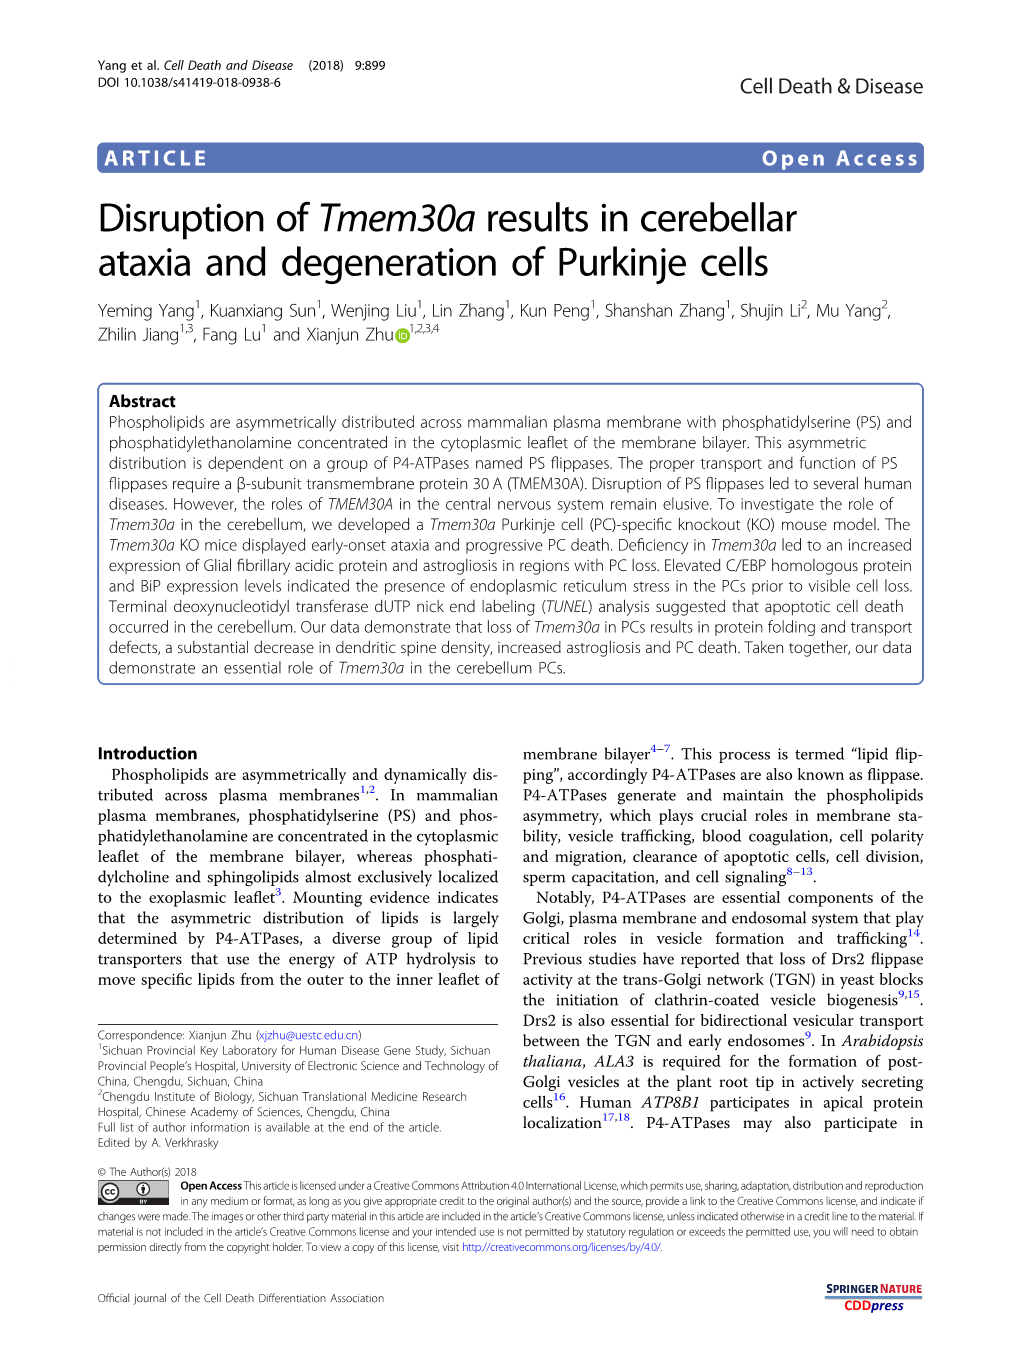 Disruption of Tmem30a Results in Cerebellar Ataxia and Degeneration